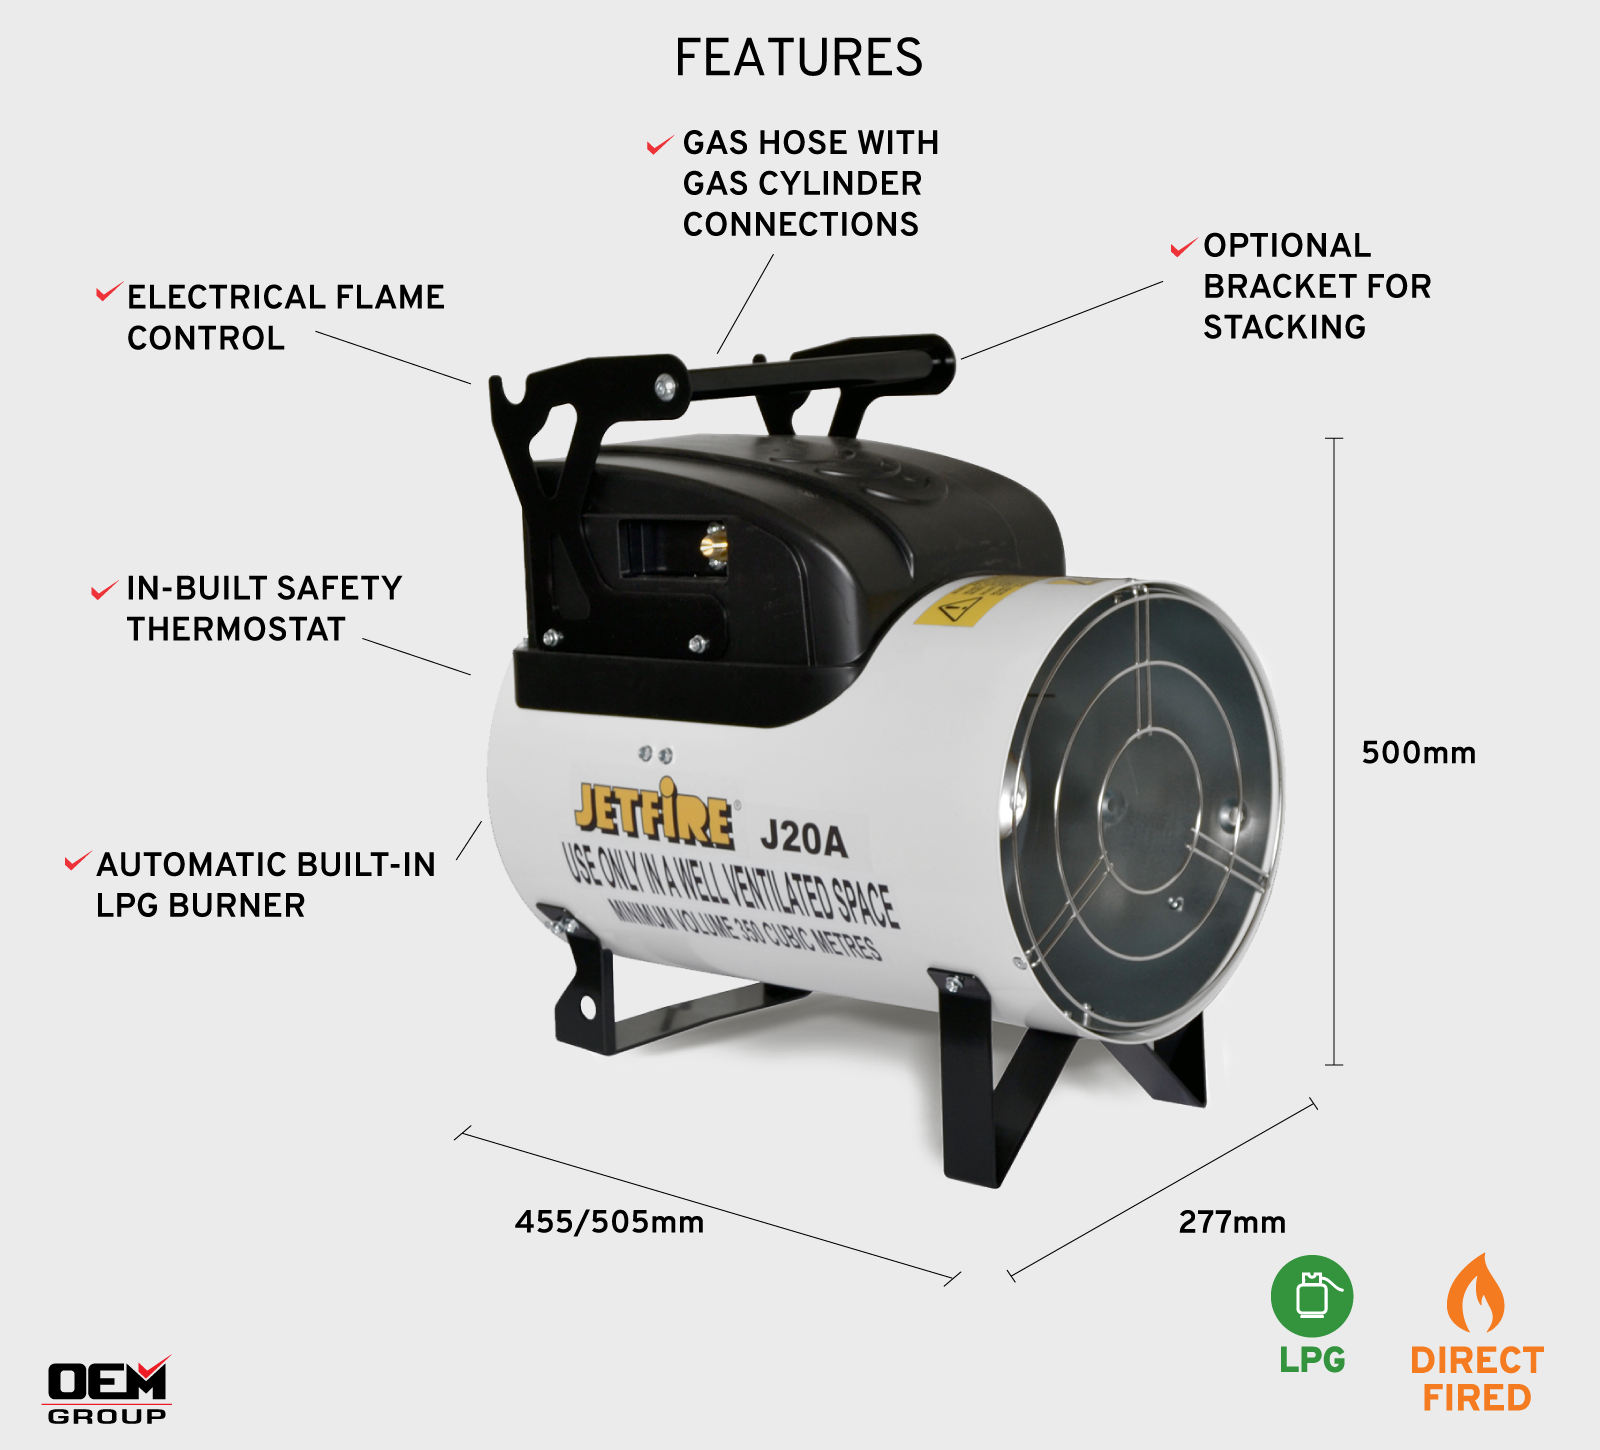 J20A JETFIRE LPG Heater Features Annotated